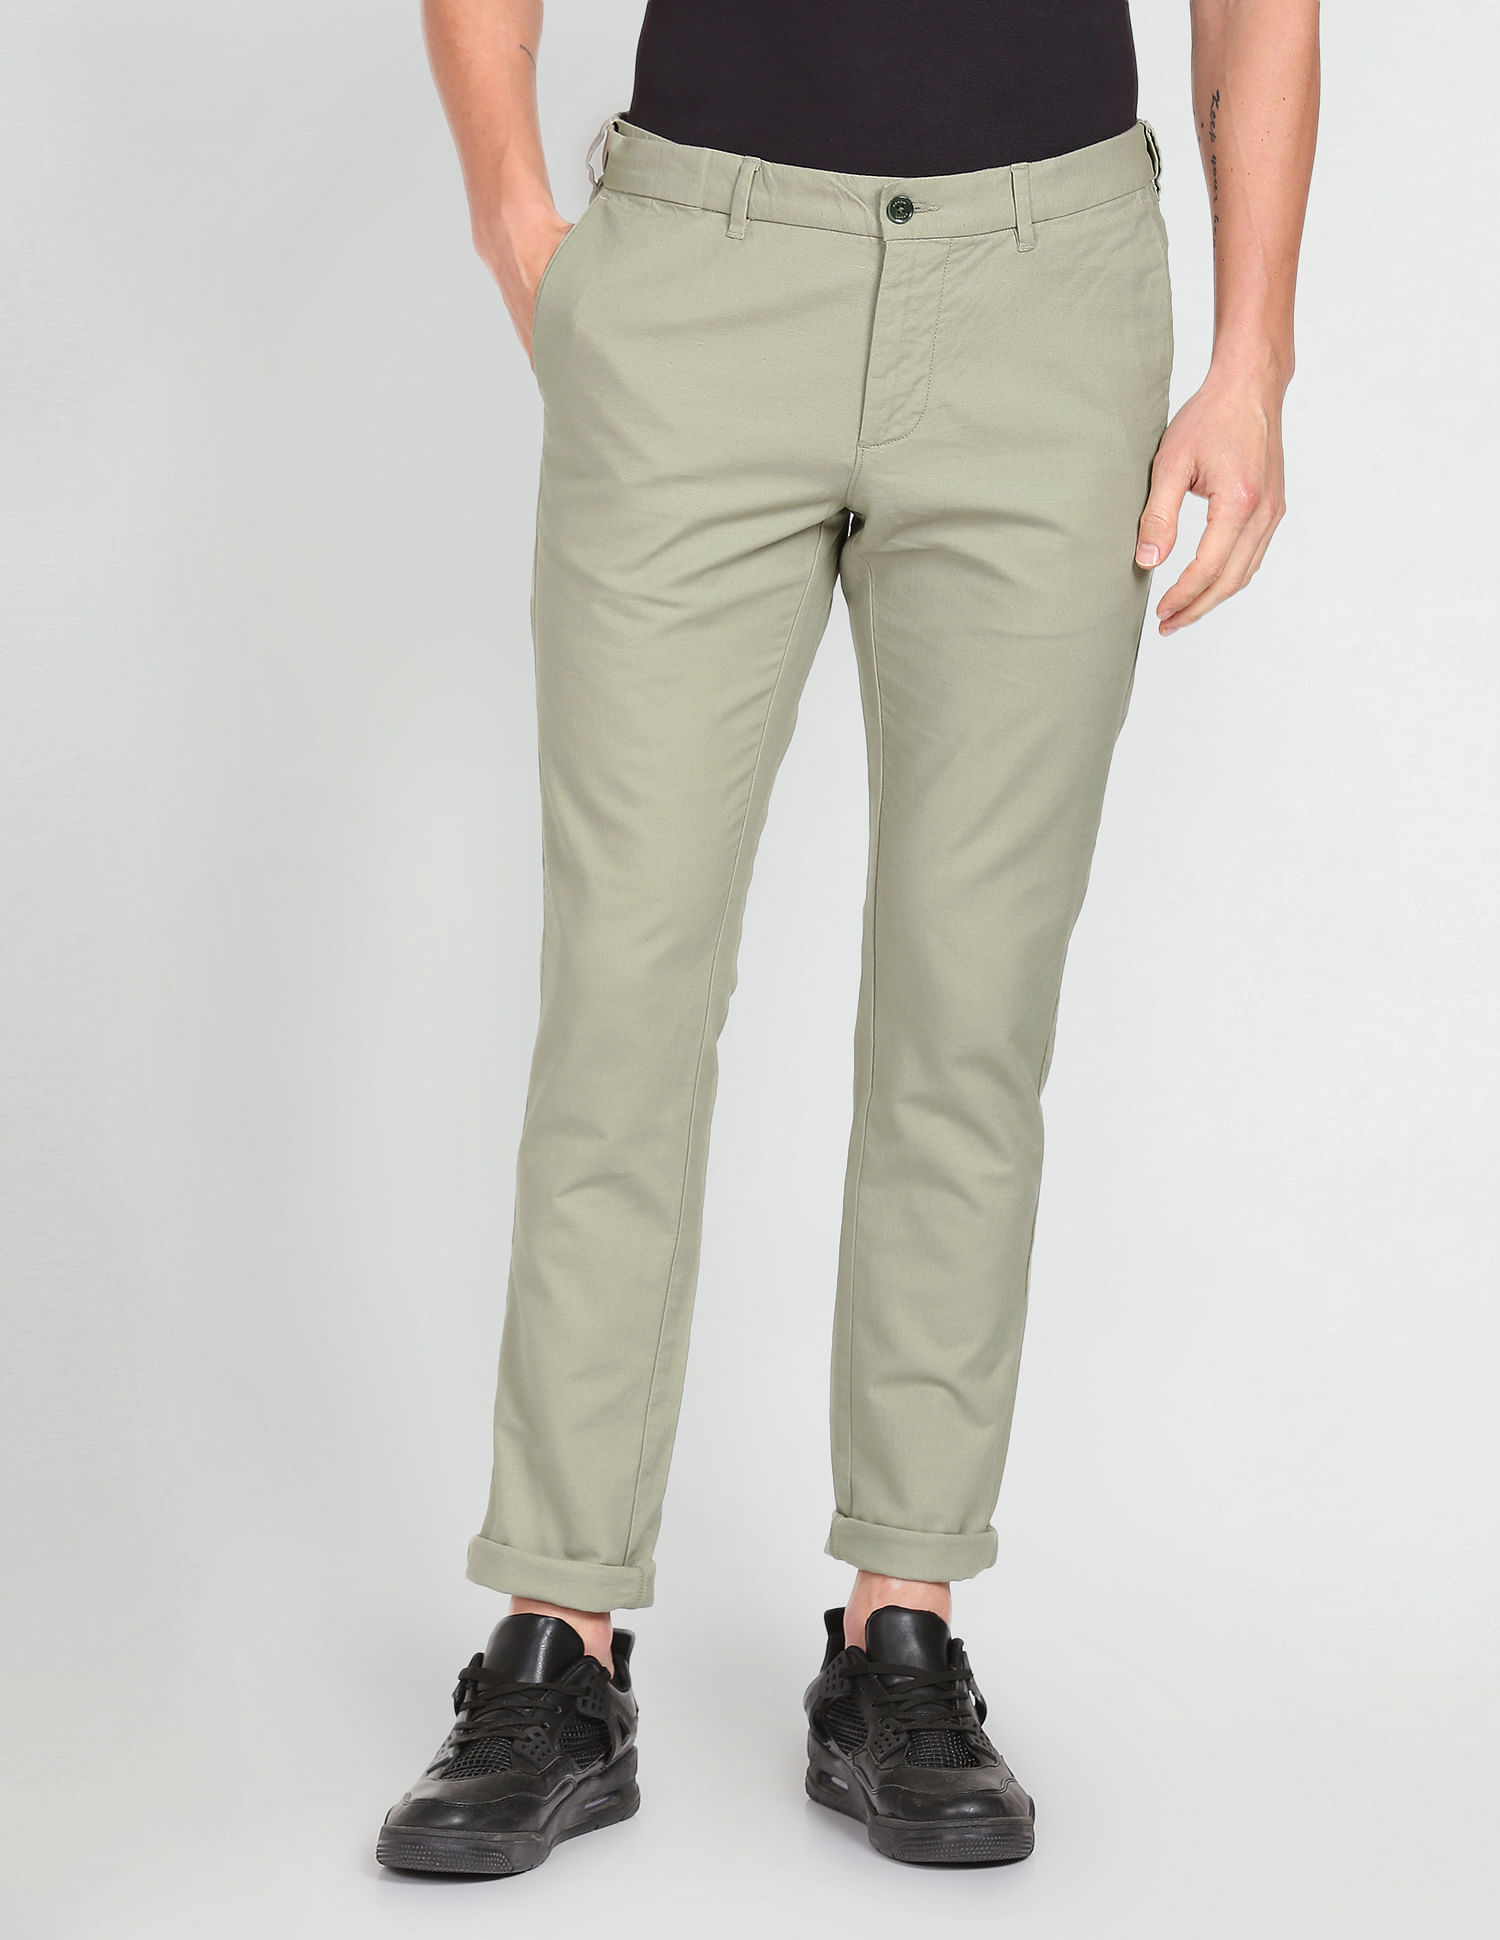 Buy Slim Fit Trousers with Belt online  Looksgudin